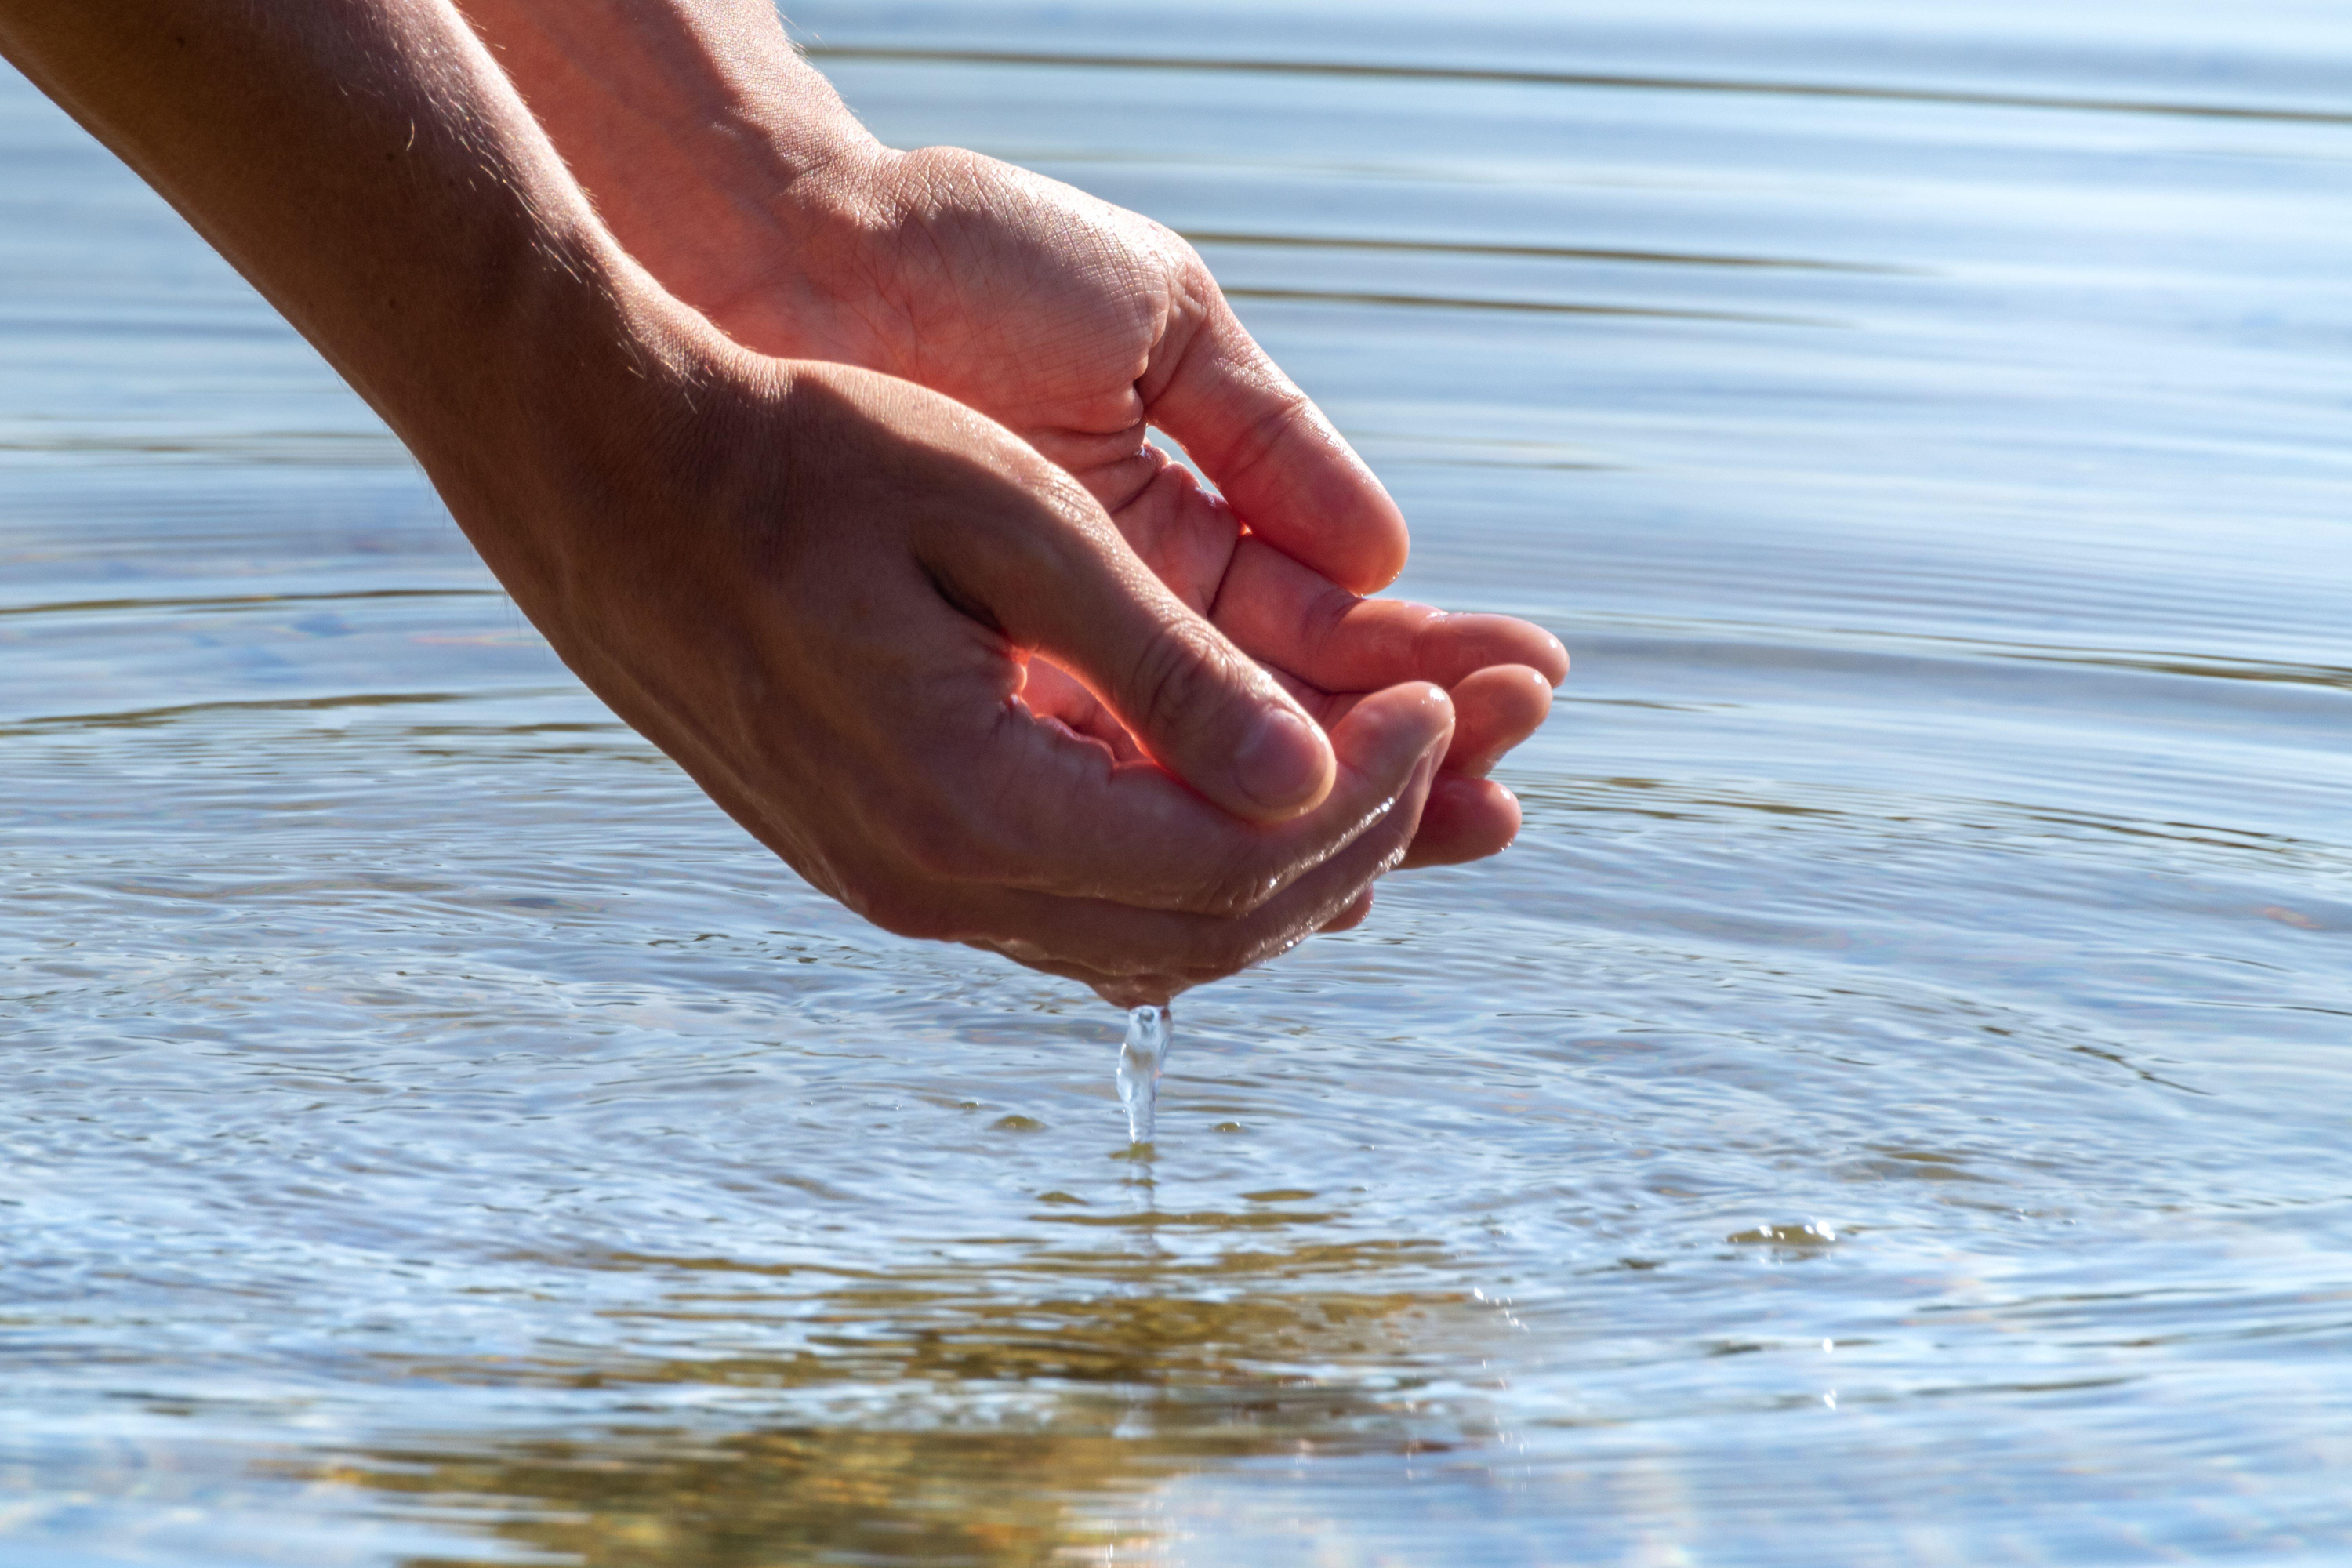 Hands dipped in water (Alamy/PA)